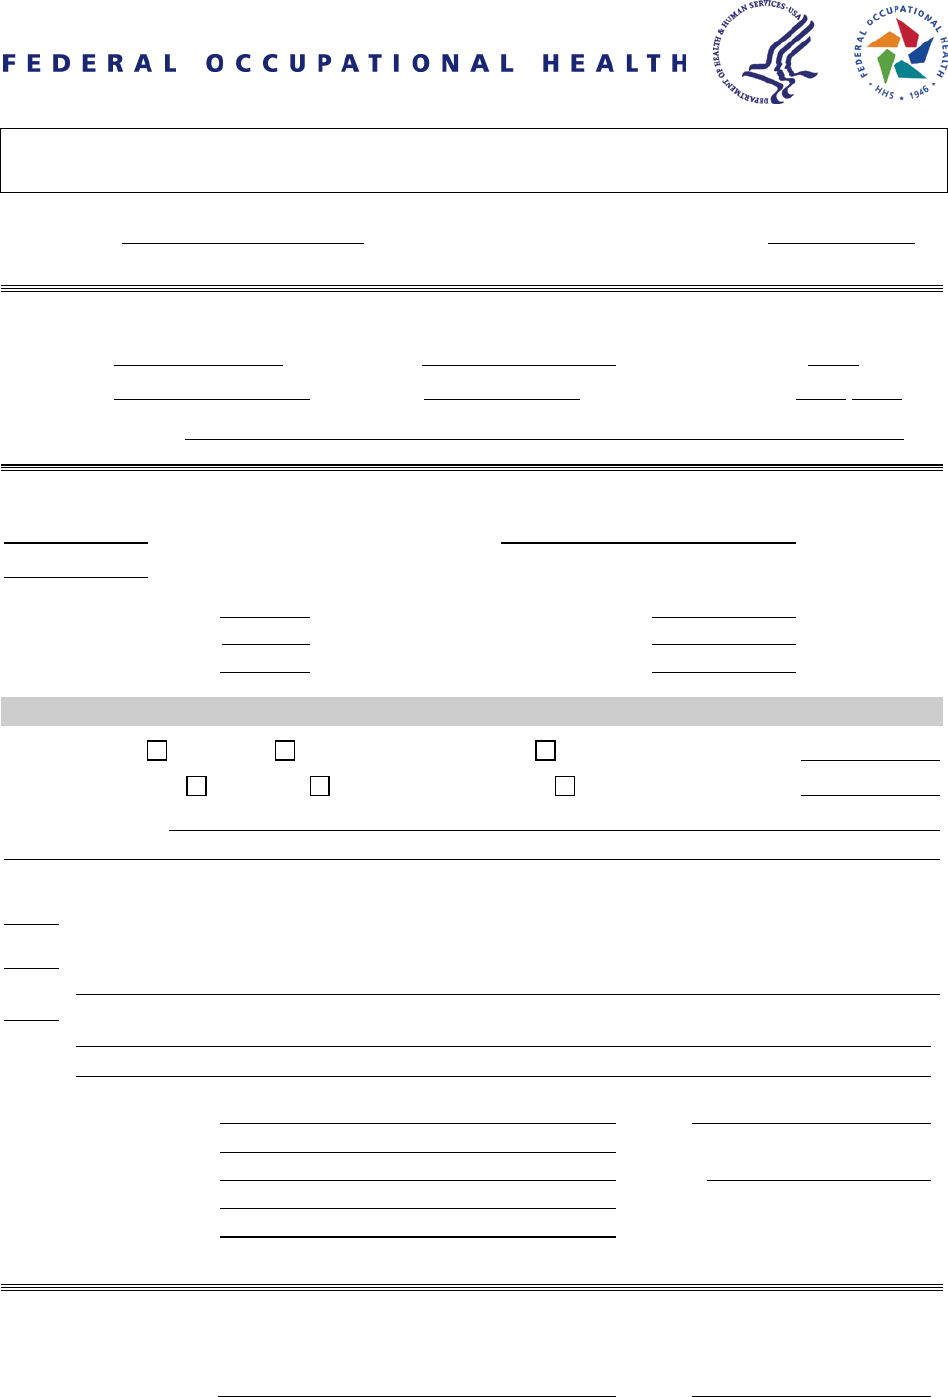 Medical Clearance Form 1